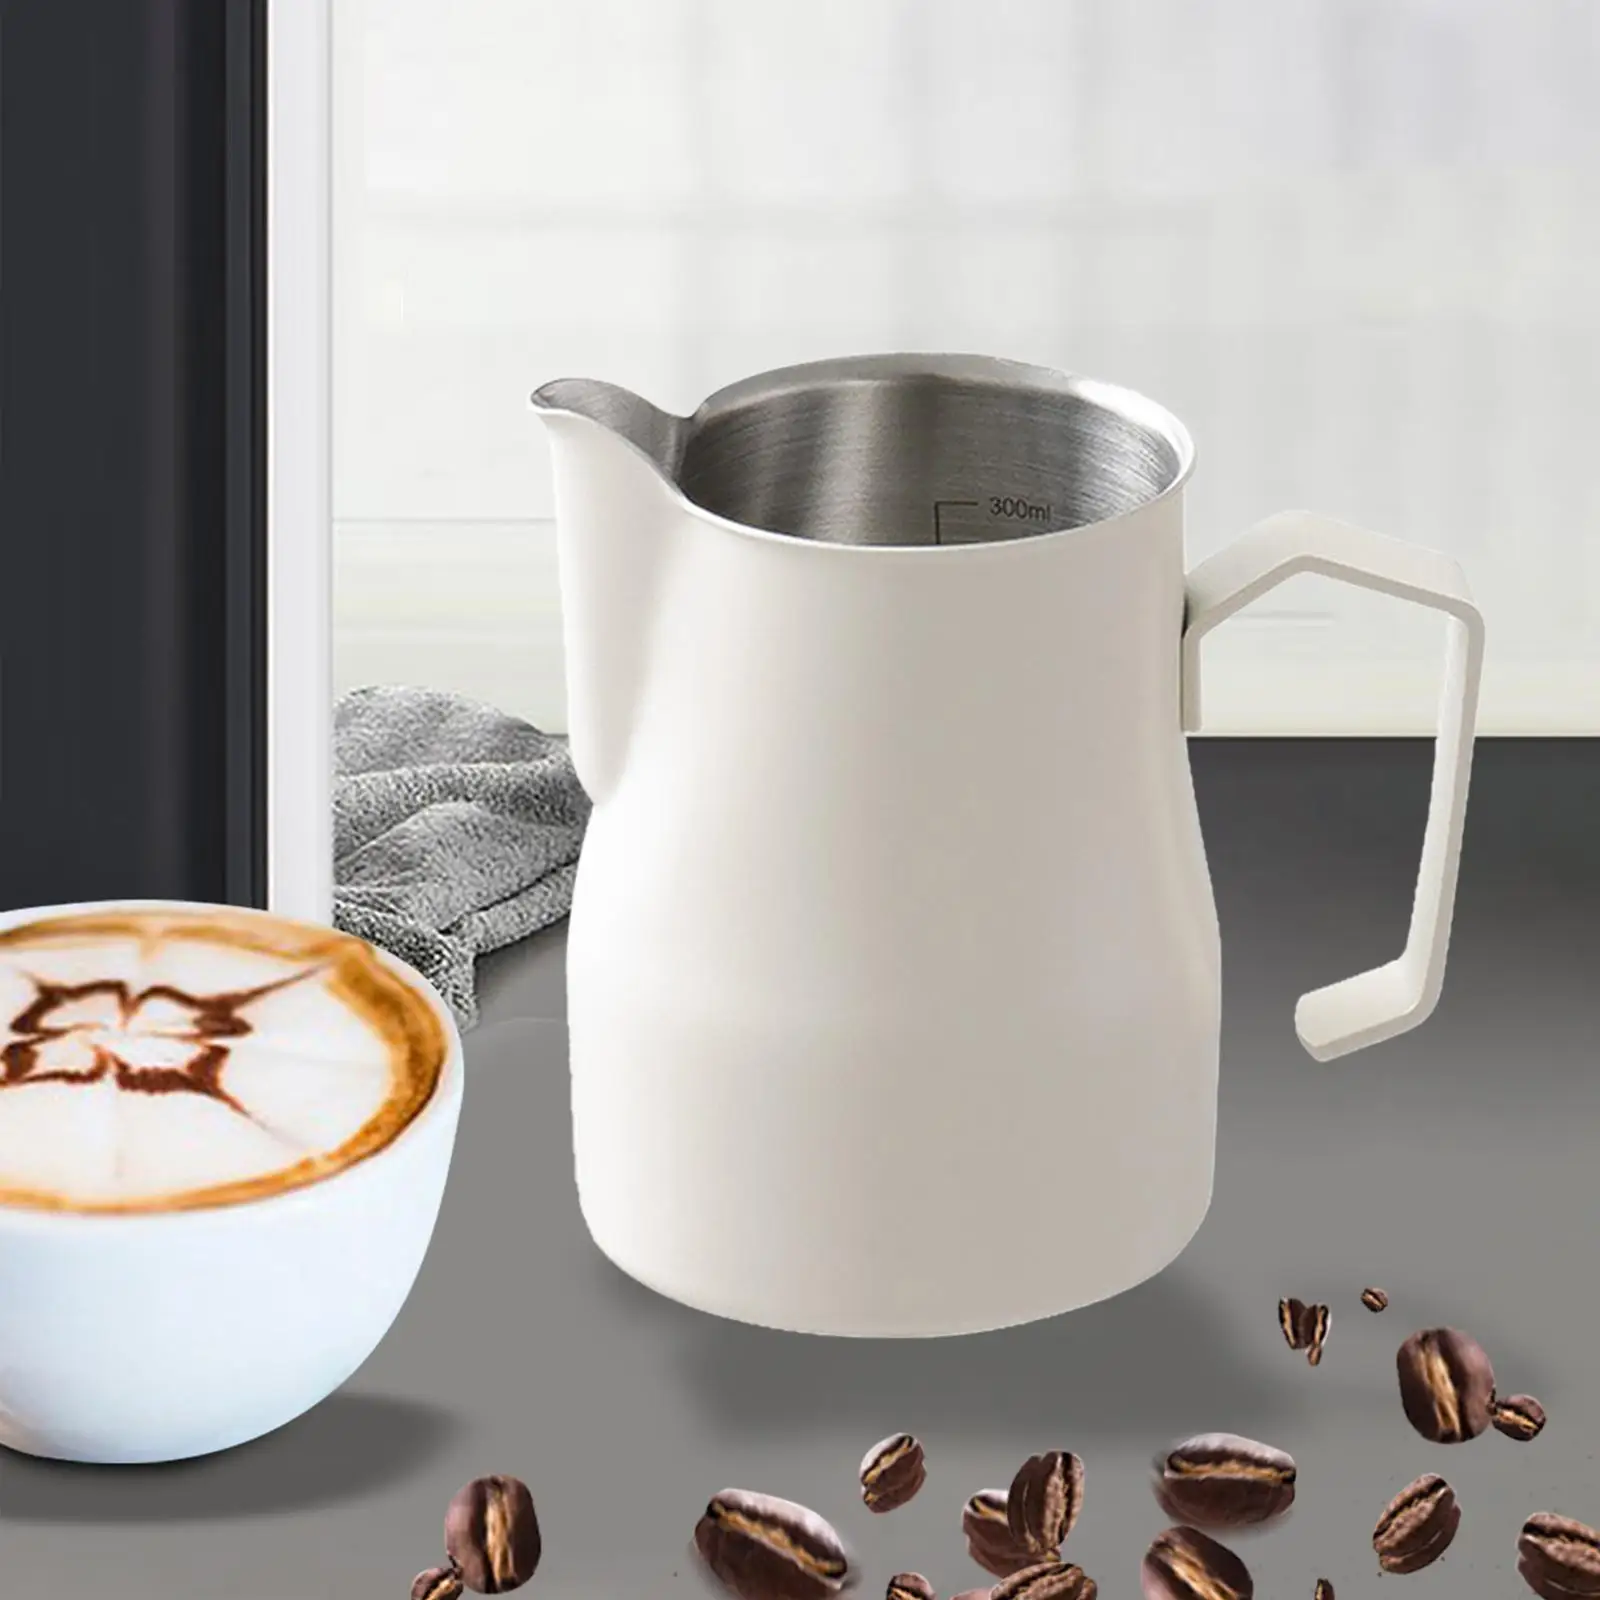 Milk Frothing Pitcher Stainless Steel Milk Frother Cup with Scale Espresso Steaming Pitcher for Lattes Cappuccino coffee